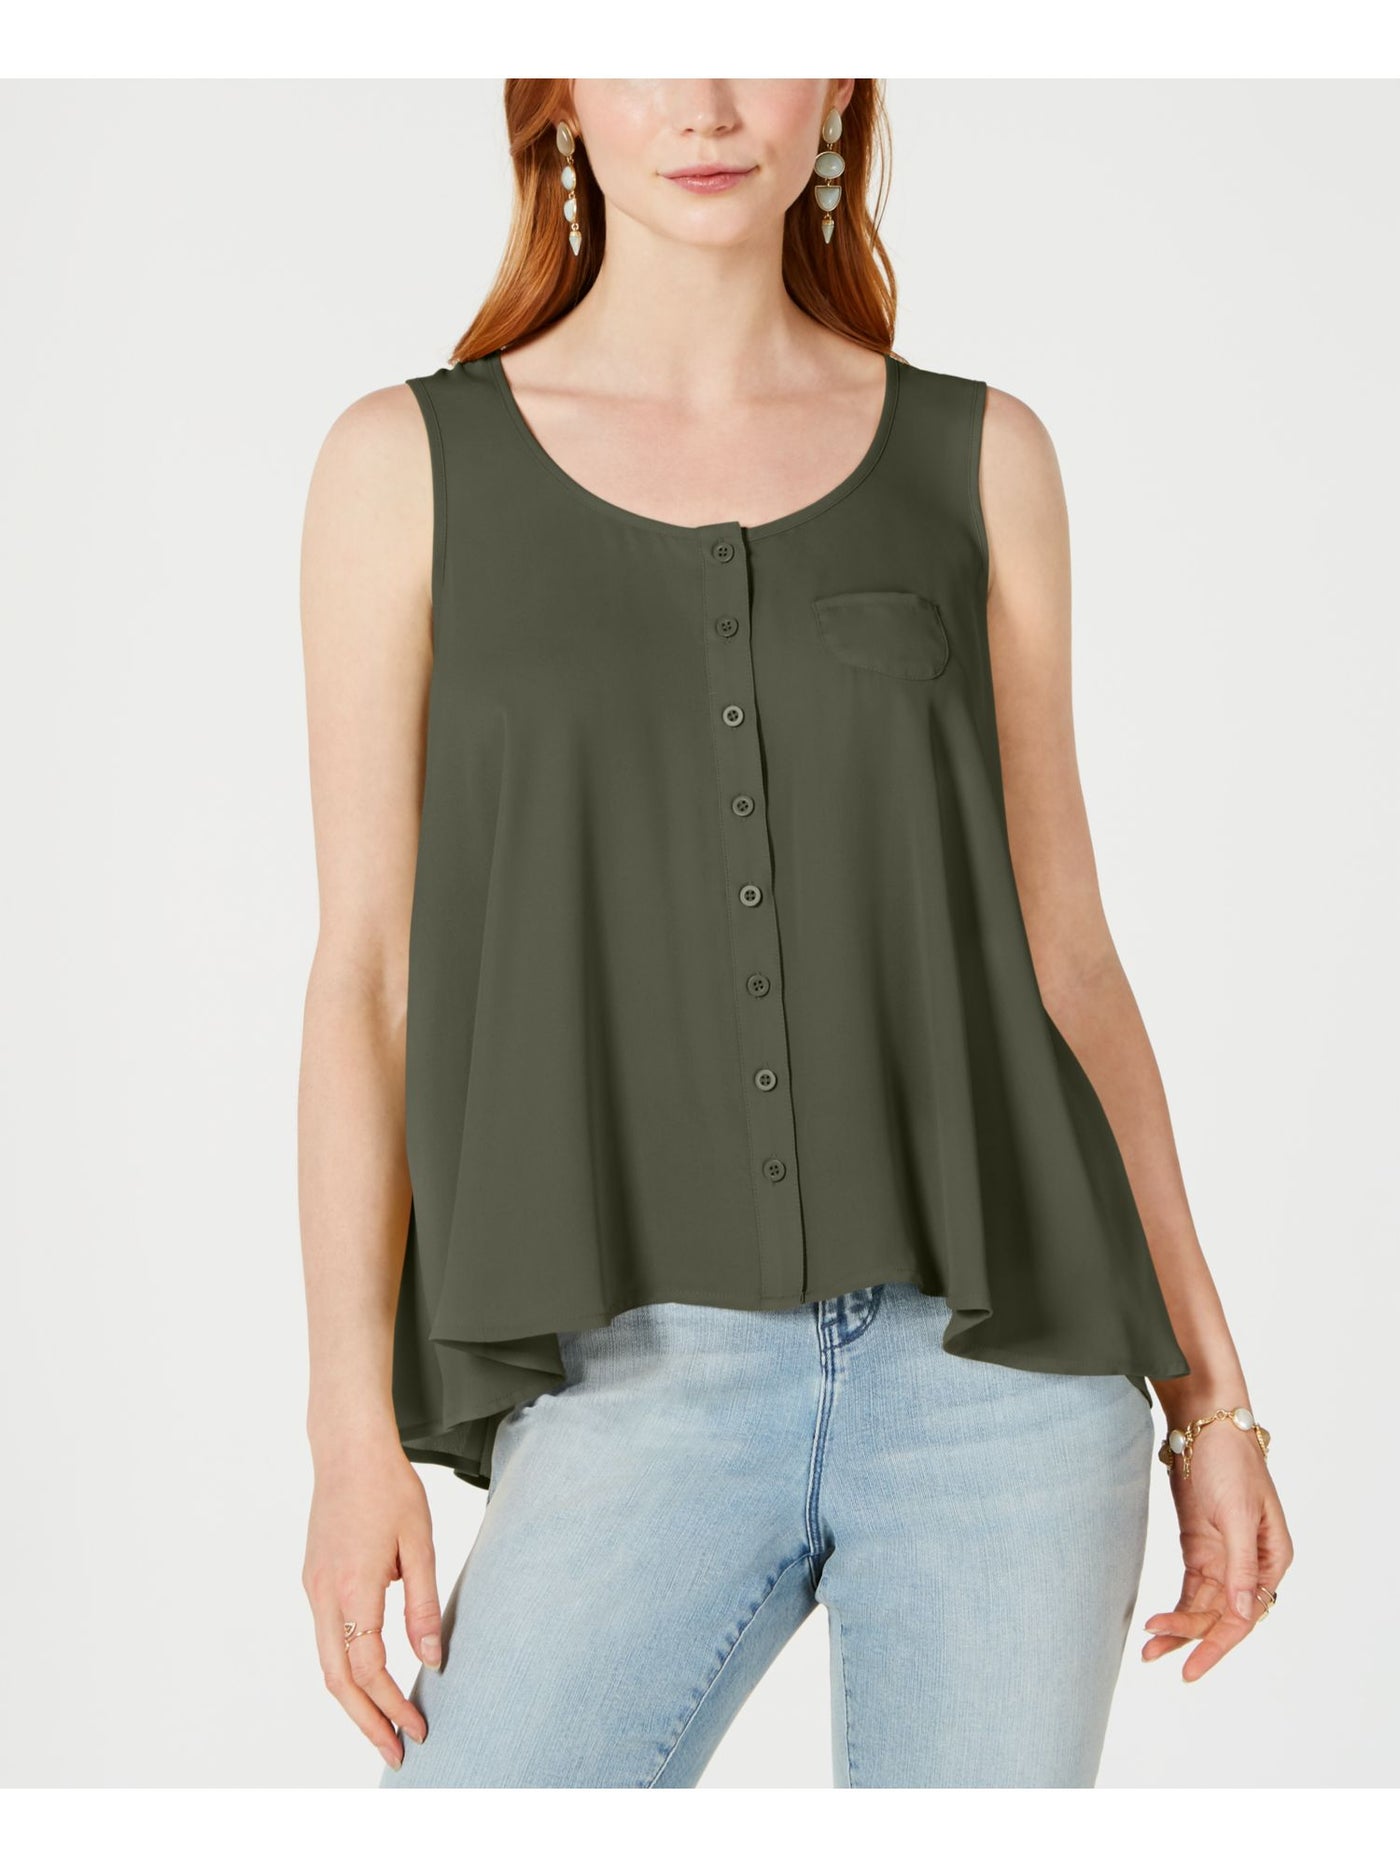 STYLE & COMPANY Womens Swing Sleeveless Scoop Neck Cocktail Blouse